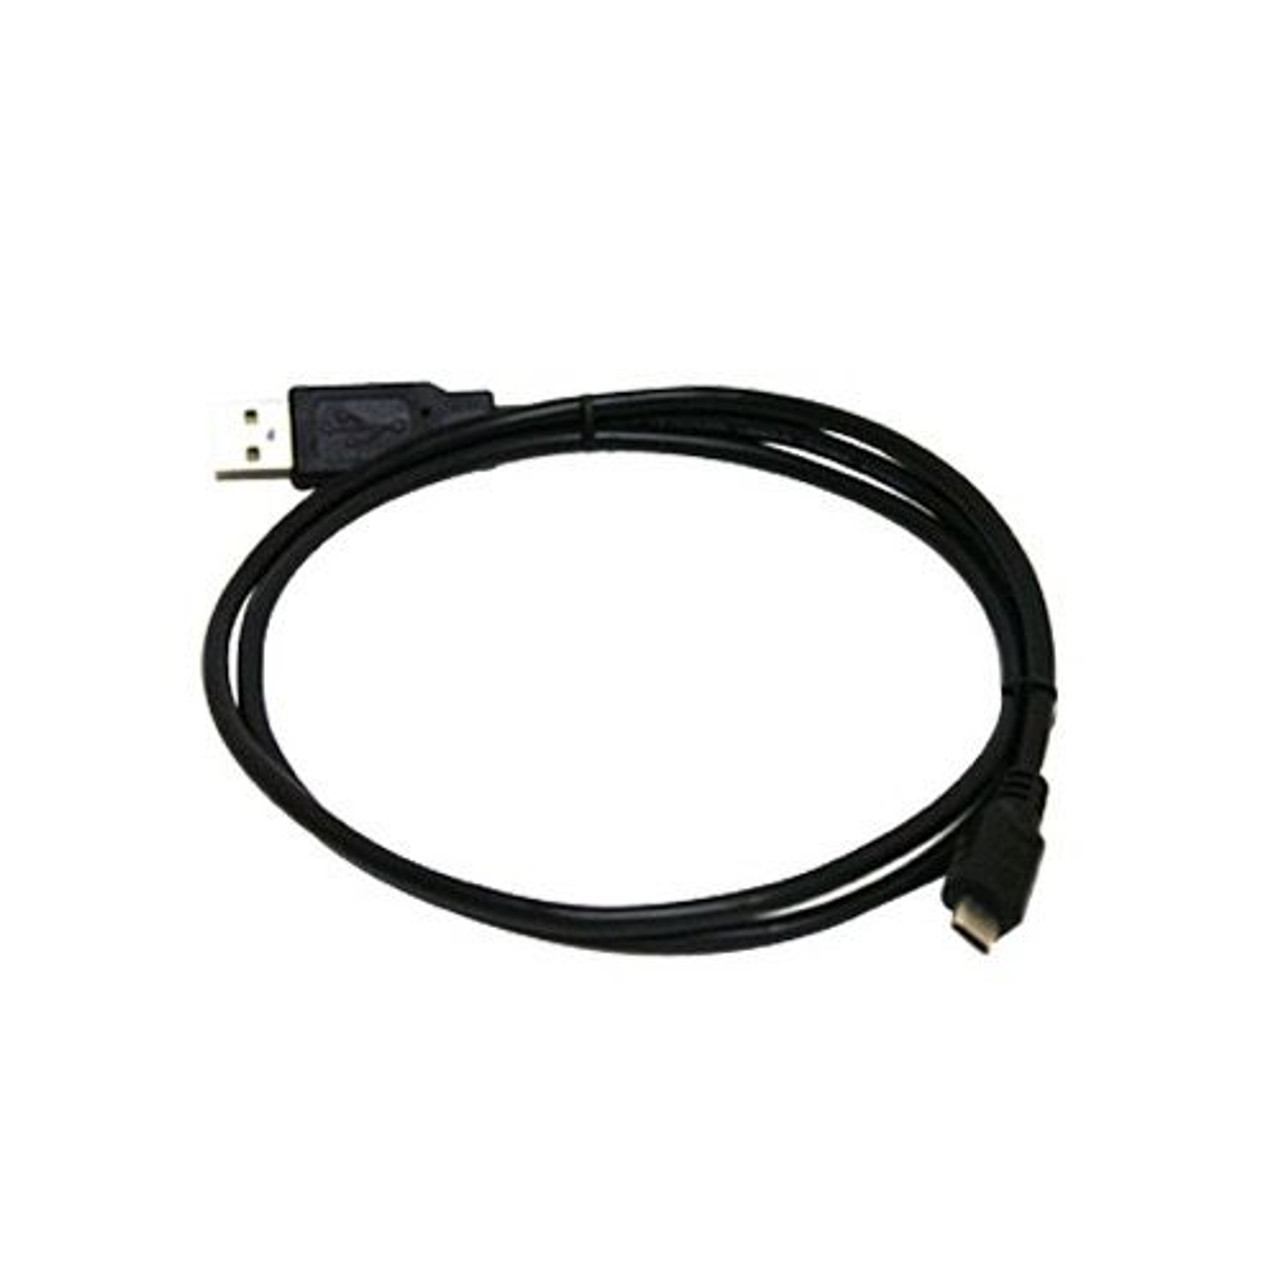 Steren 506-116BK 6' Feet USB A 2.0 to USB Micro B Cable Black USB Data Cable Cell Phone Camera MP3 Player PDA